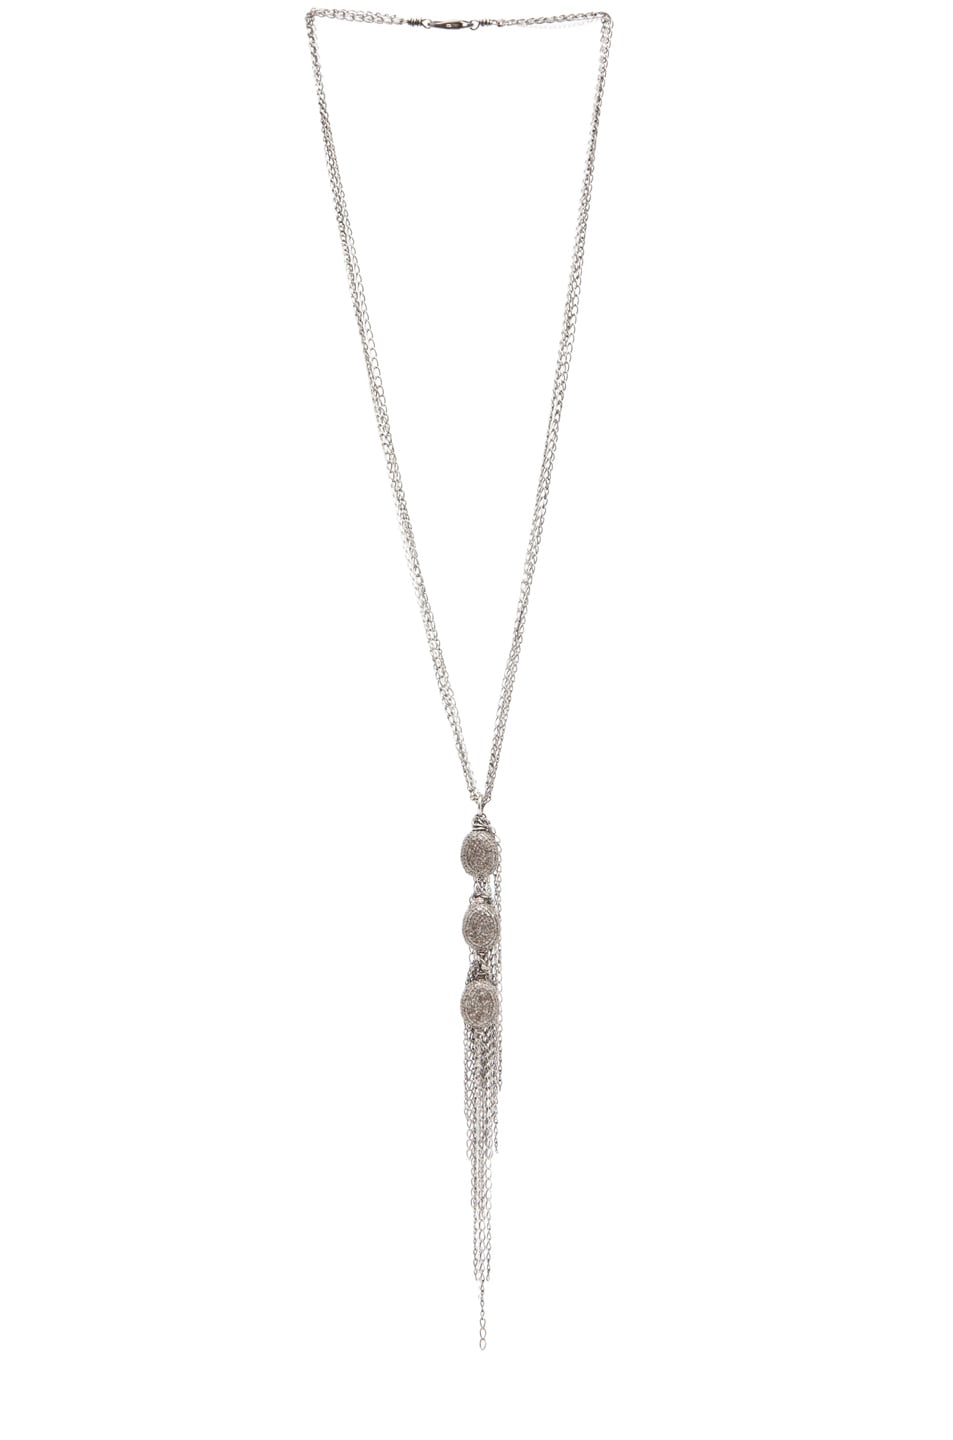 Irit Design Long Necklace with 3 Diamonds in Silver | FWRD